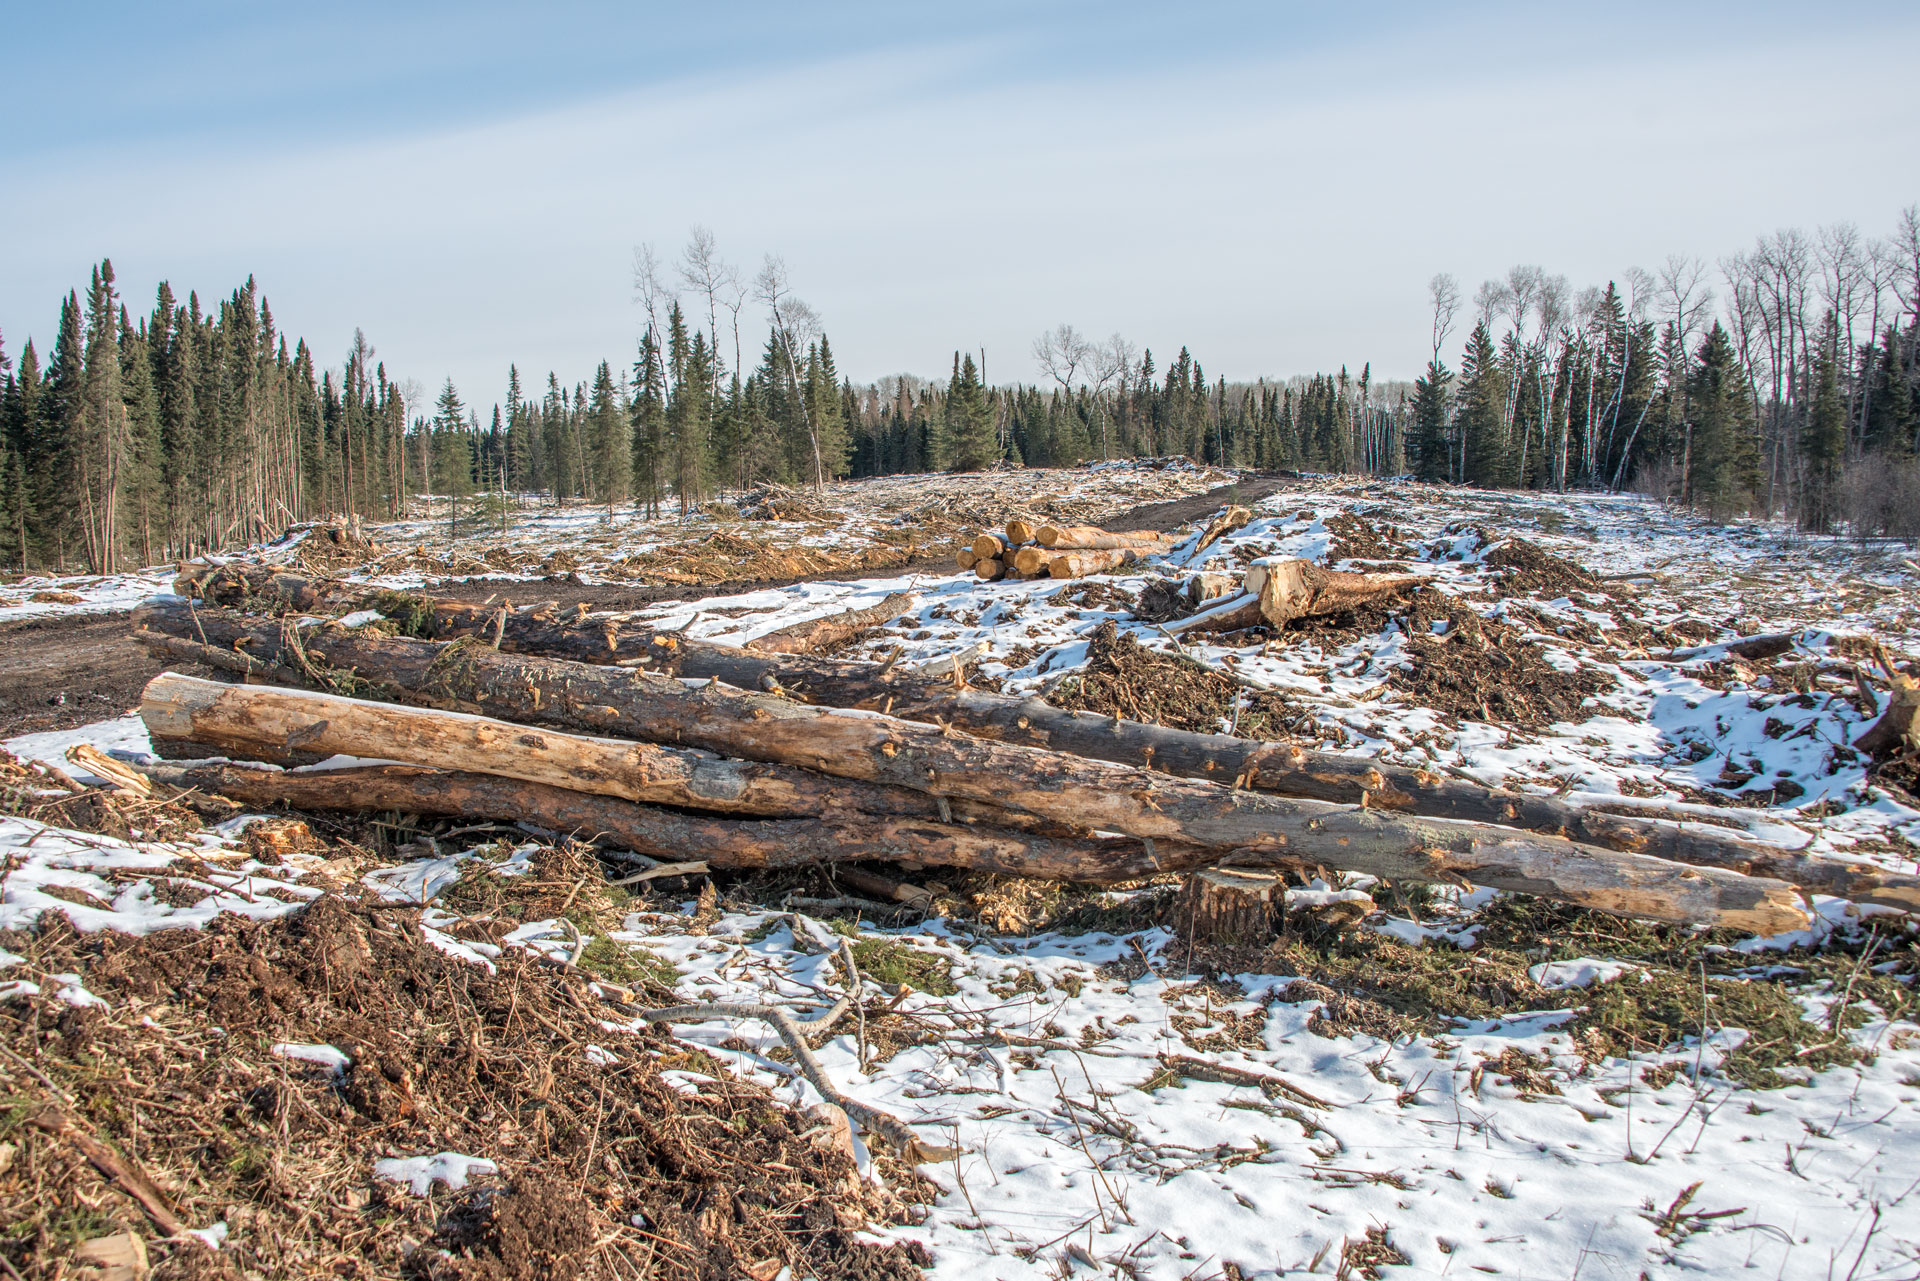 Remaining cut logs in a snowy clearcut